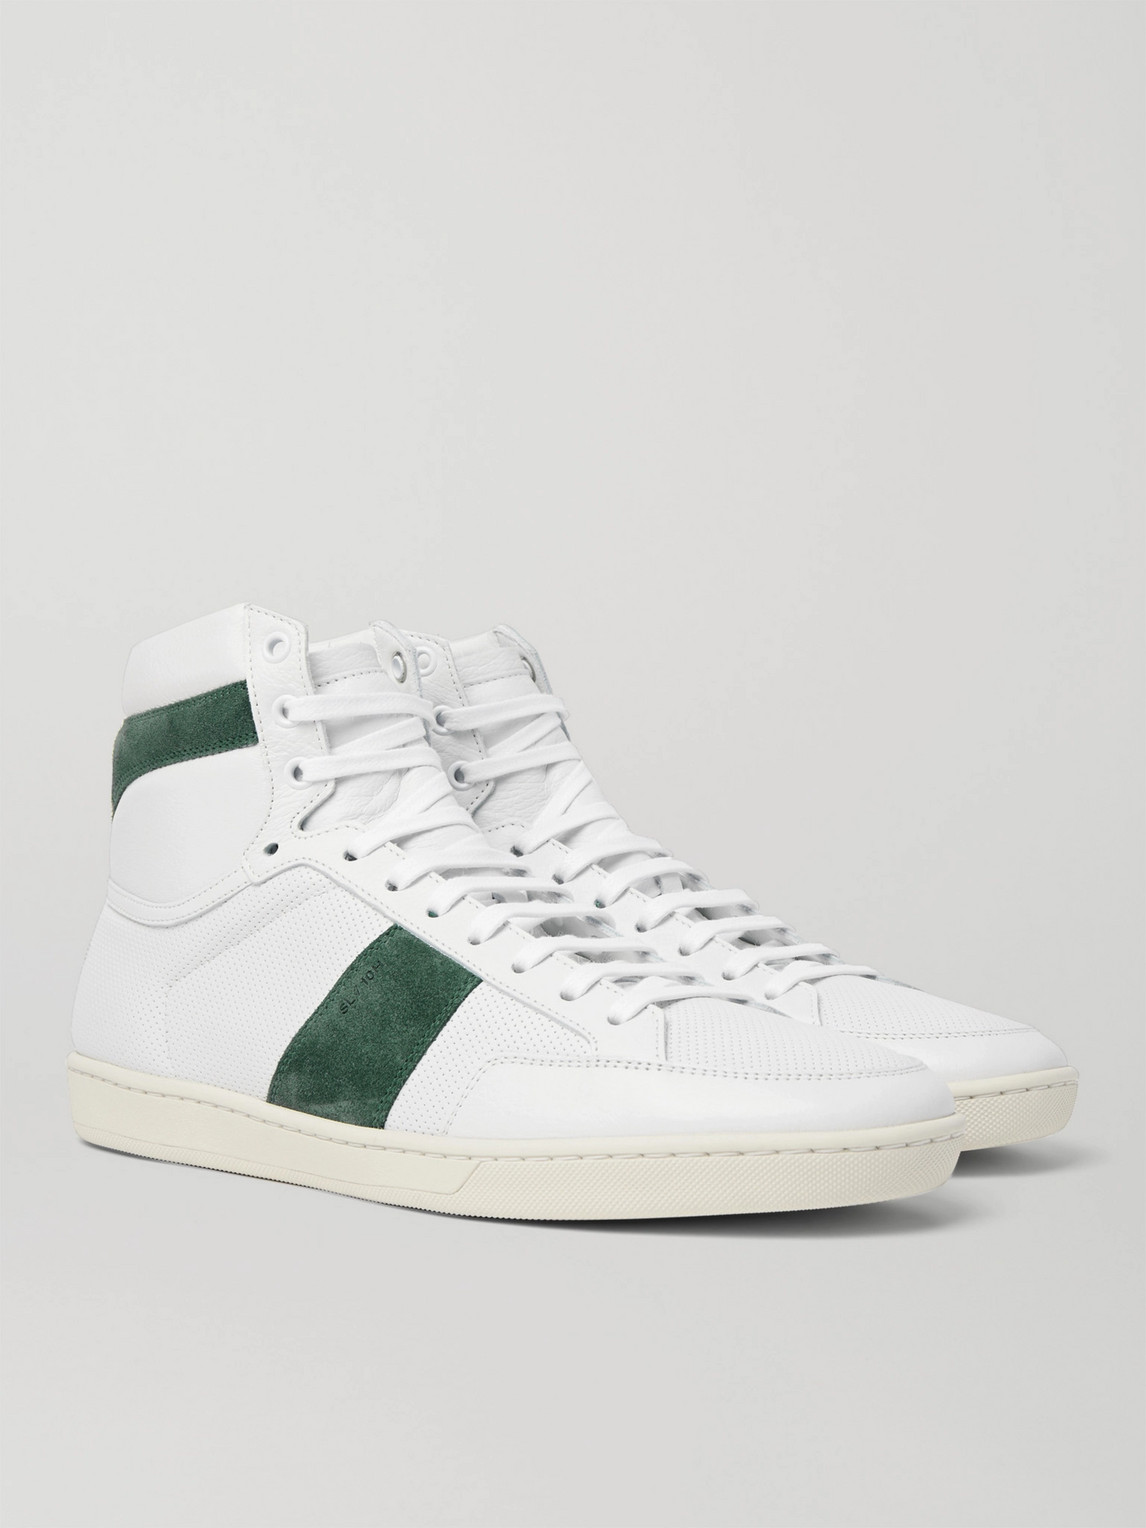 SAINT LAURENT SL/10 SUEDE-TRIMMED PERFORATED LEATHER HIGH-TOP SNEAKERS